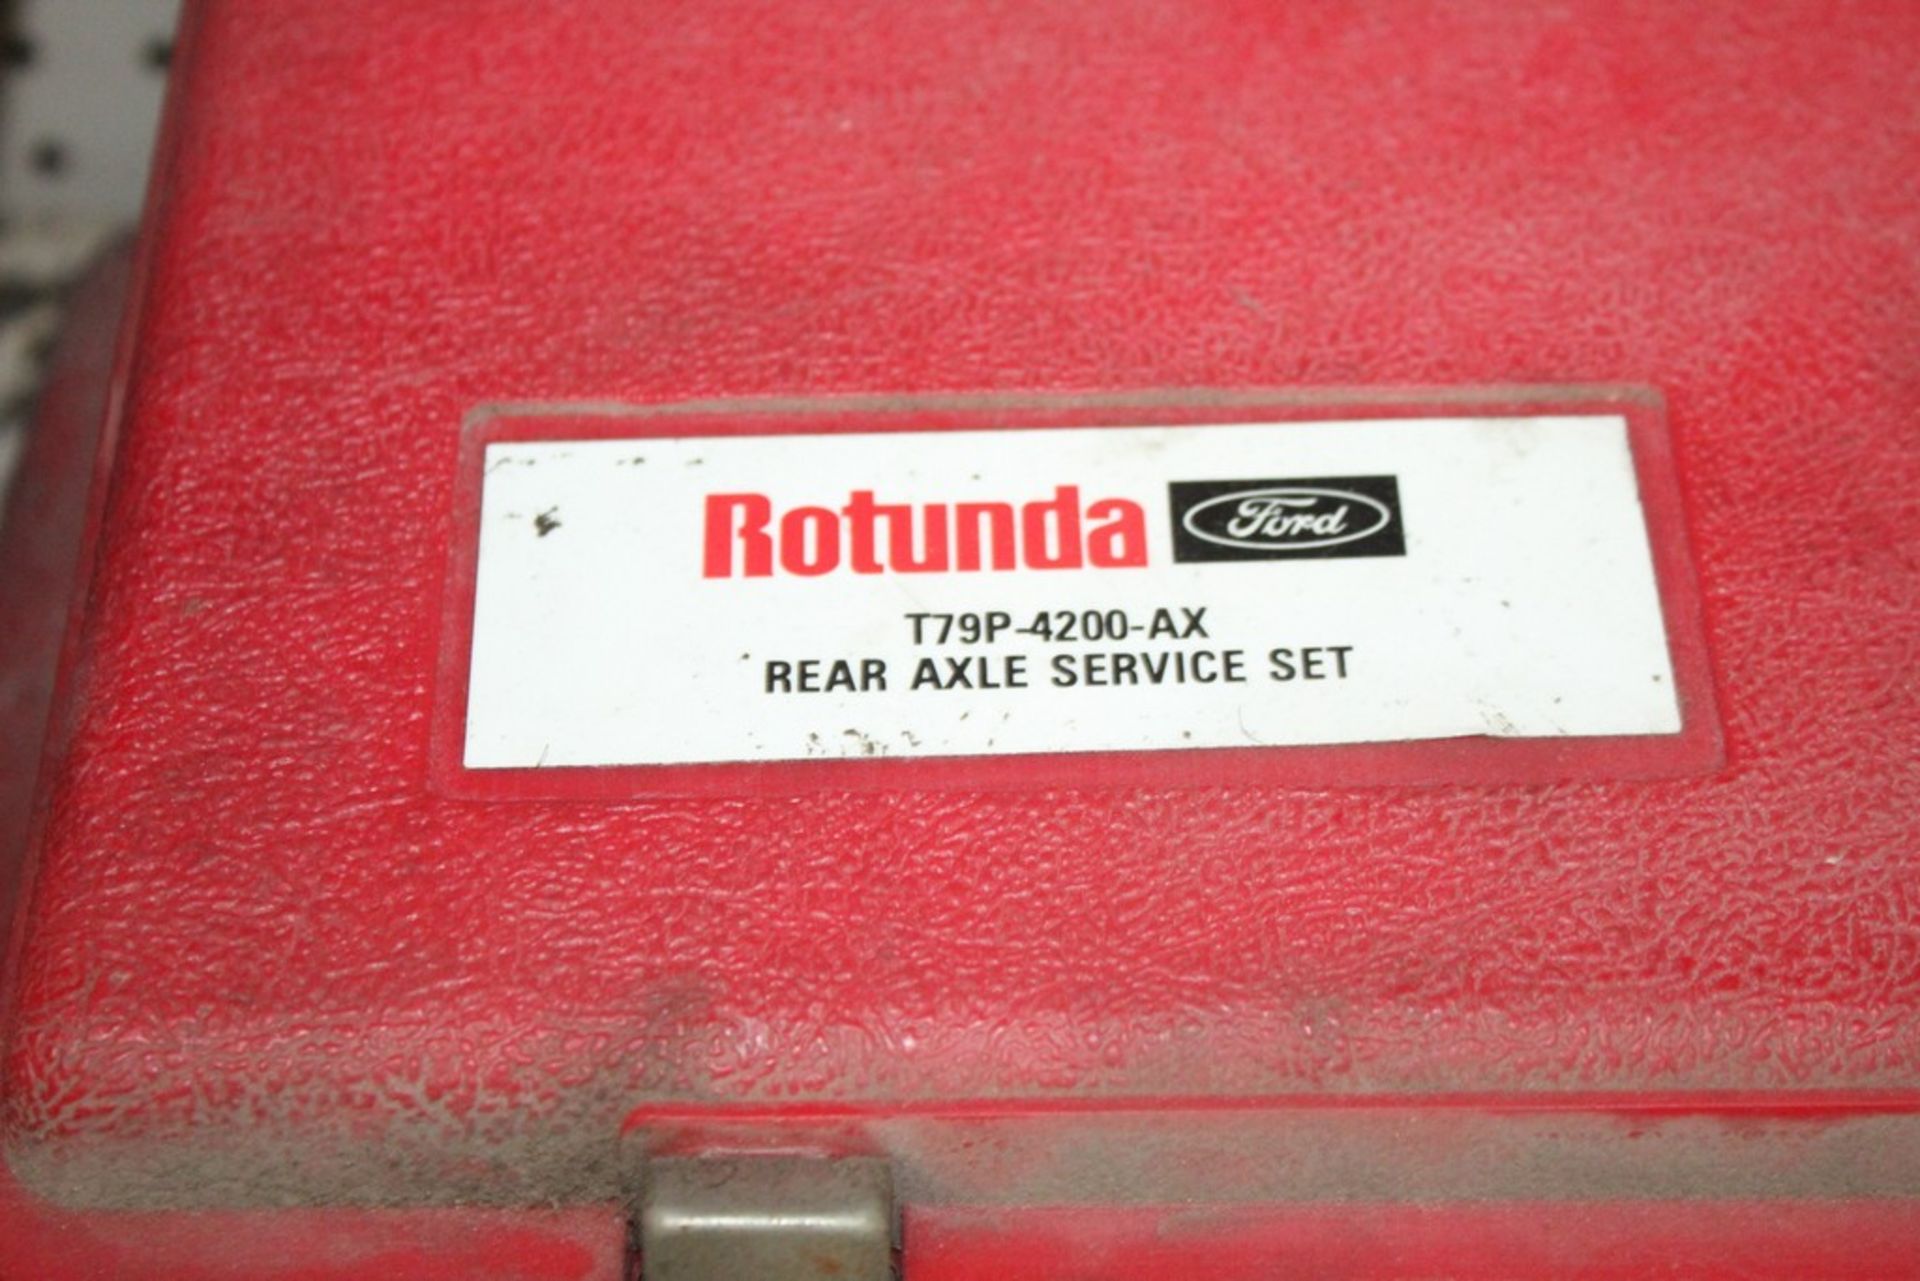 ASSORTED 1979 FORD ROTUNDA ESSENTIAL SERVICE TOOL SETS IN TWO CASES - Image 2 of 3